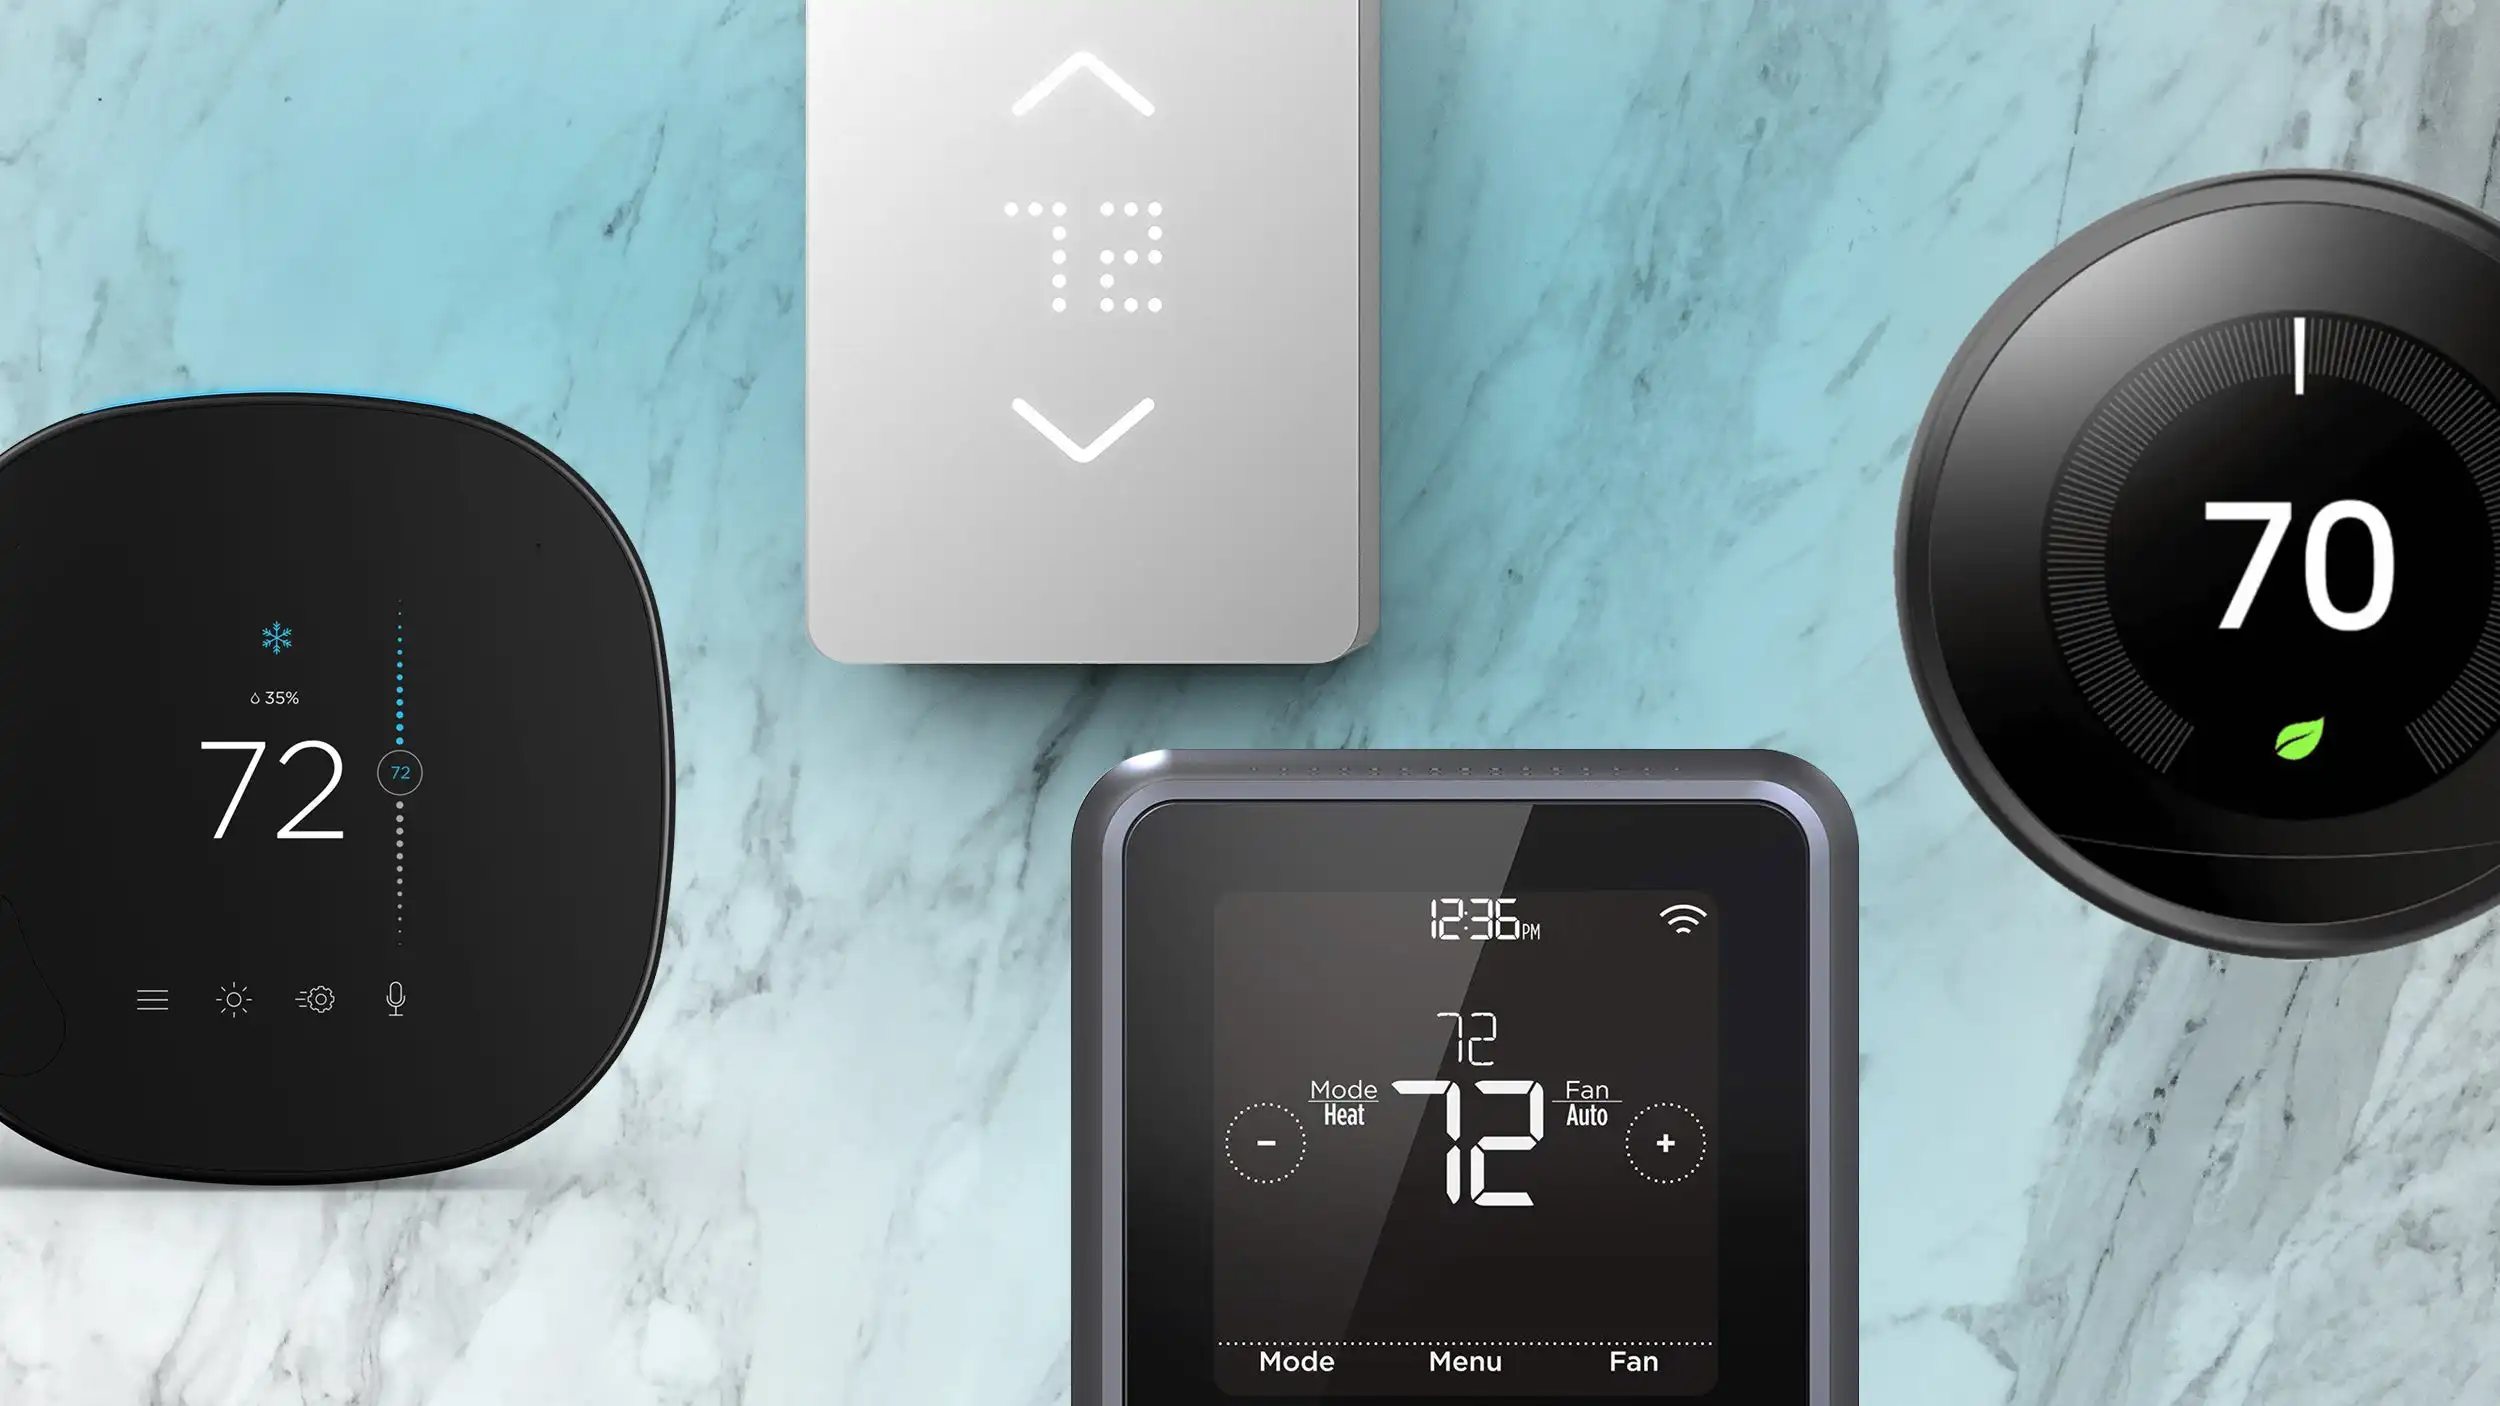 Why Does My Utility Want To Give Me A Smart Thermostat?